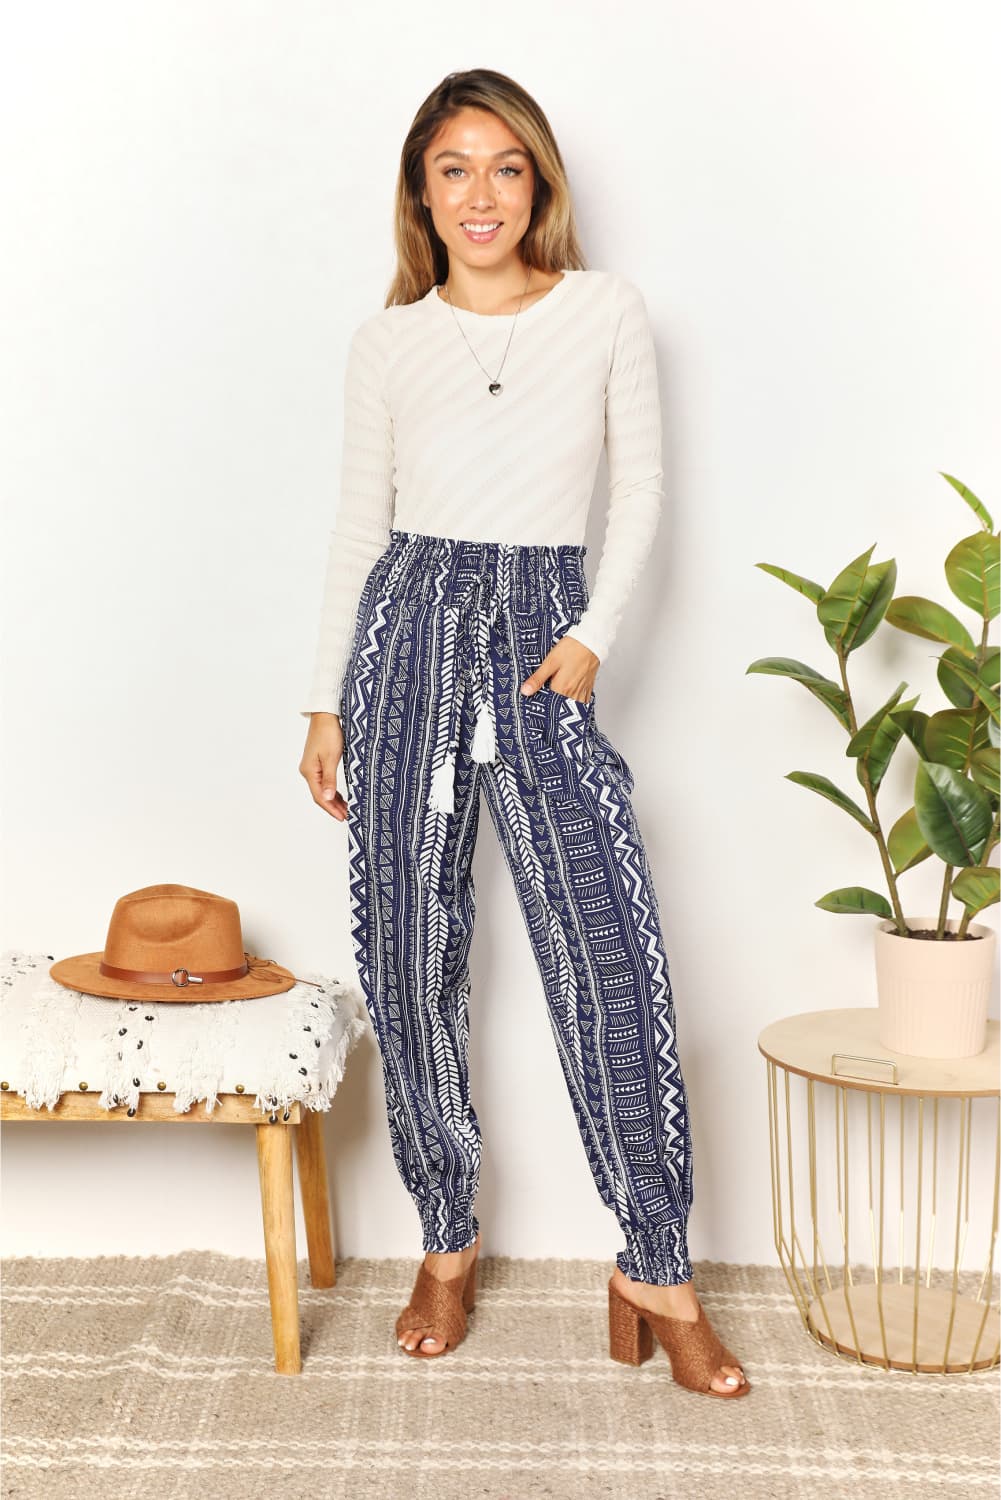 Double Take Geometric Print Tassel High-Rise Pants free shipping -Oh Em Gee Boutique